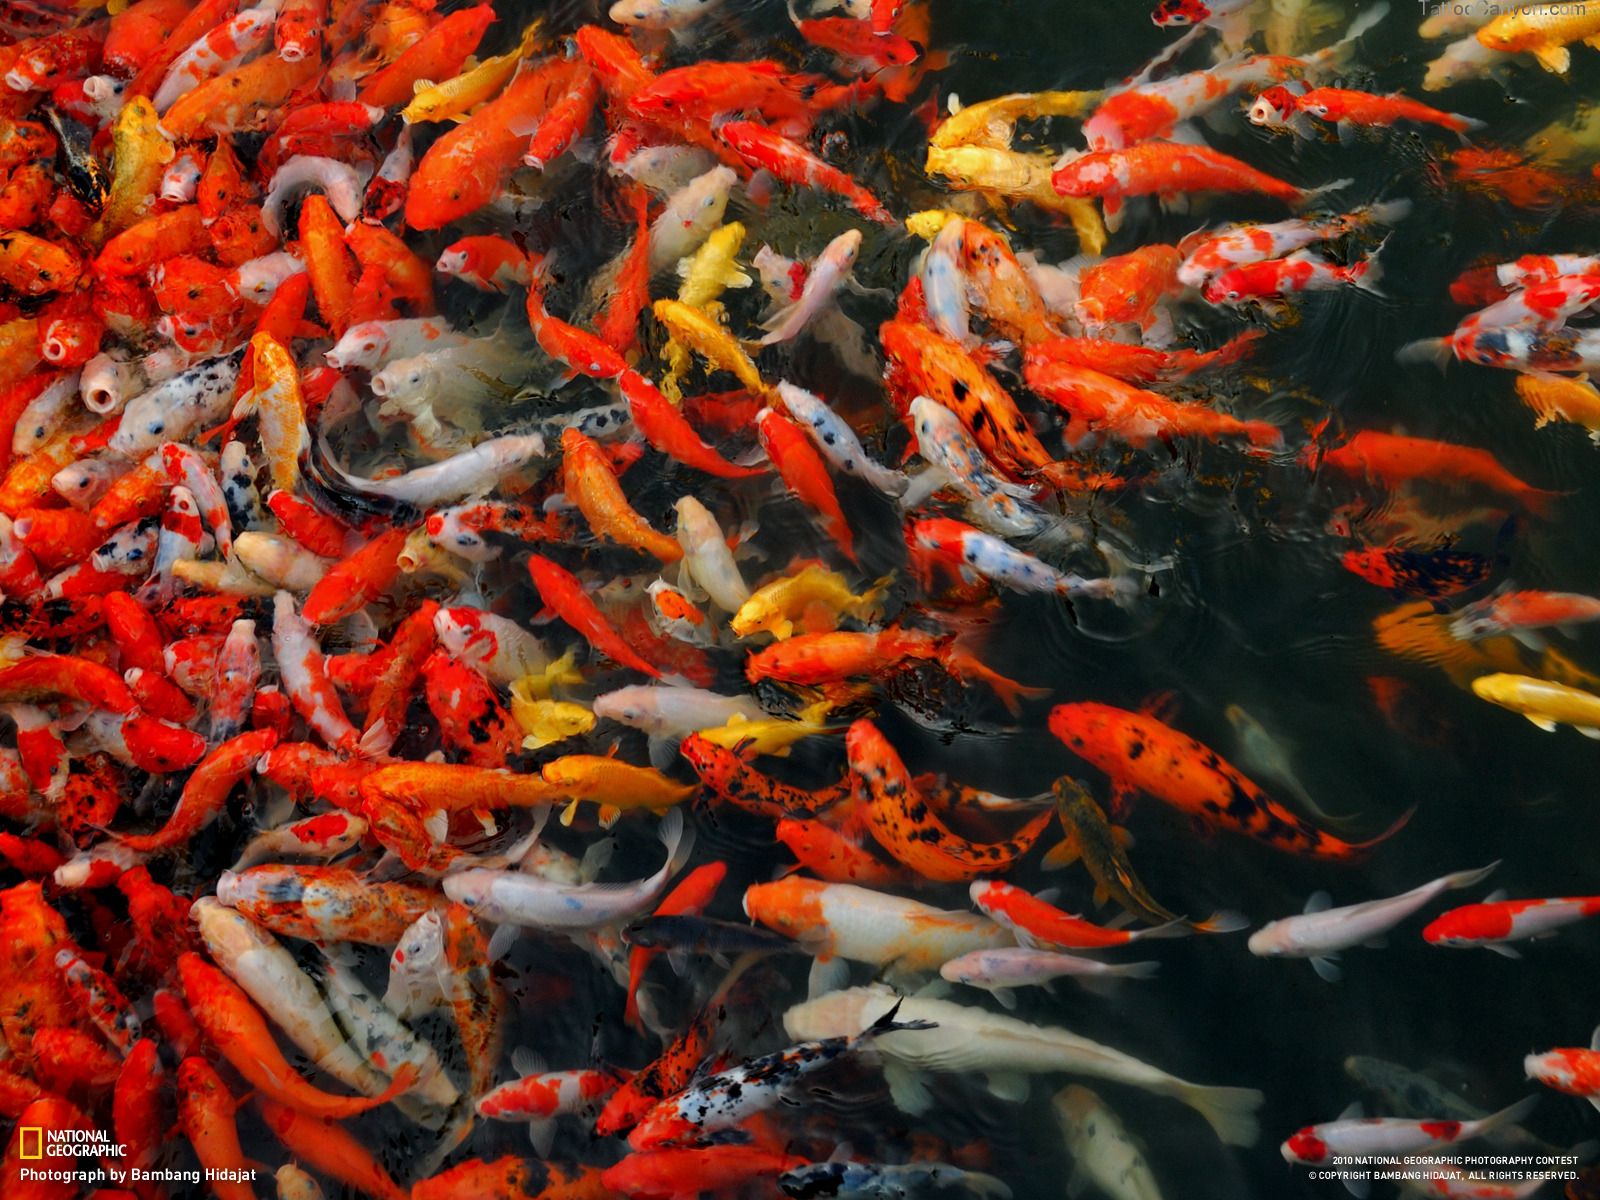 A school of colorful koi fish swim together in a pond. - Koi fish